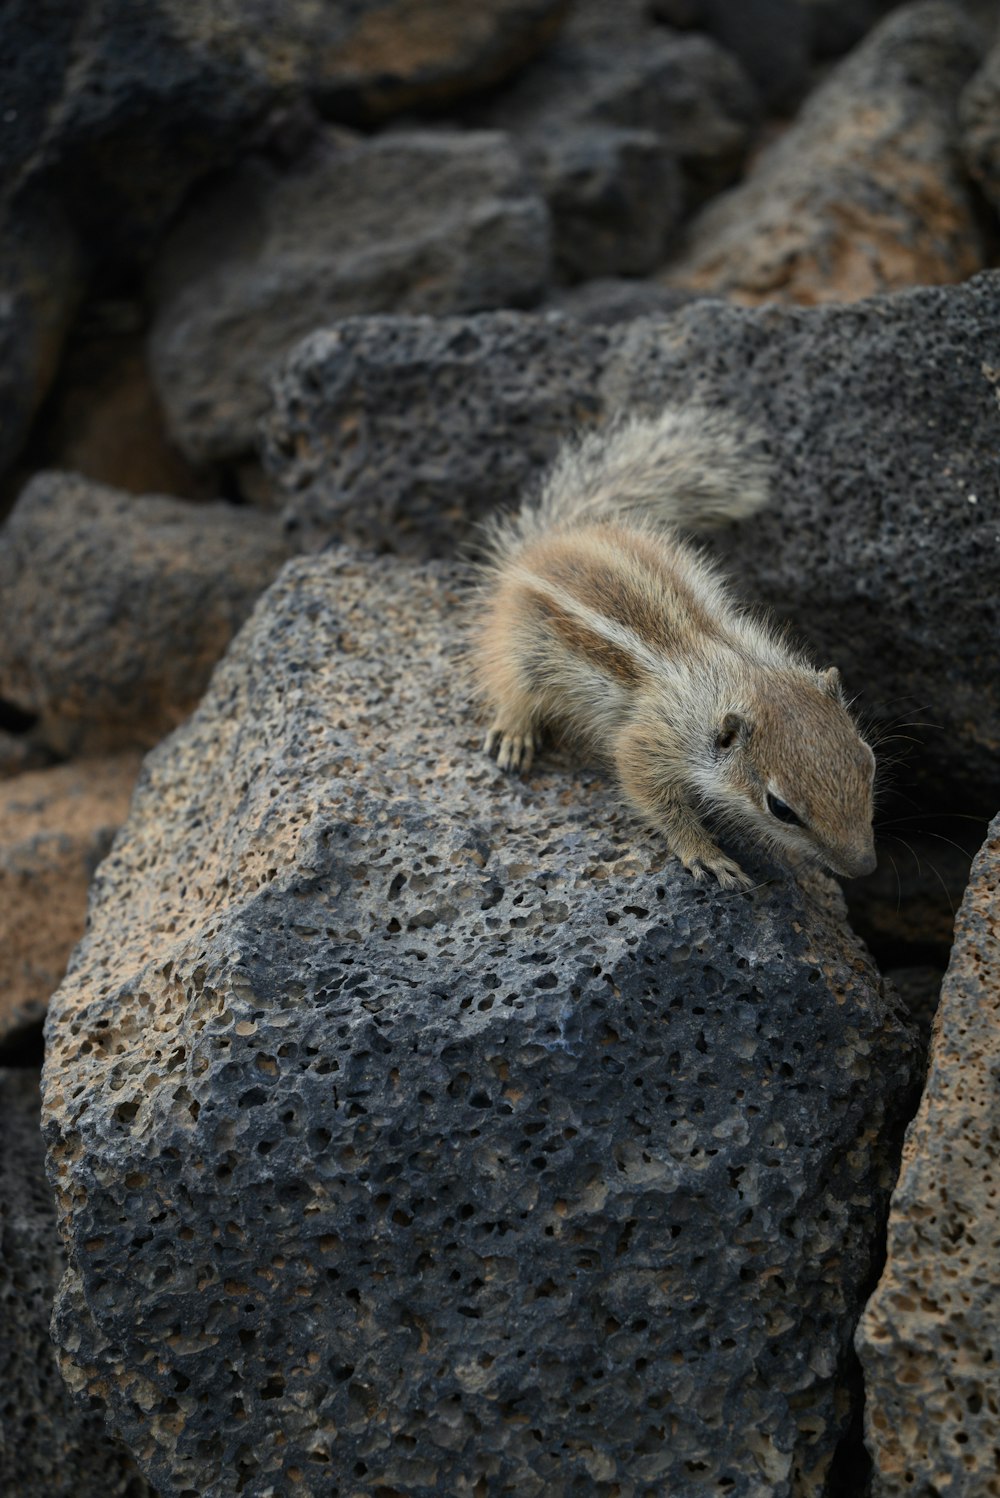 a small animal that is sitting on some rocks